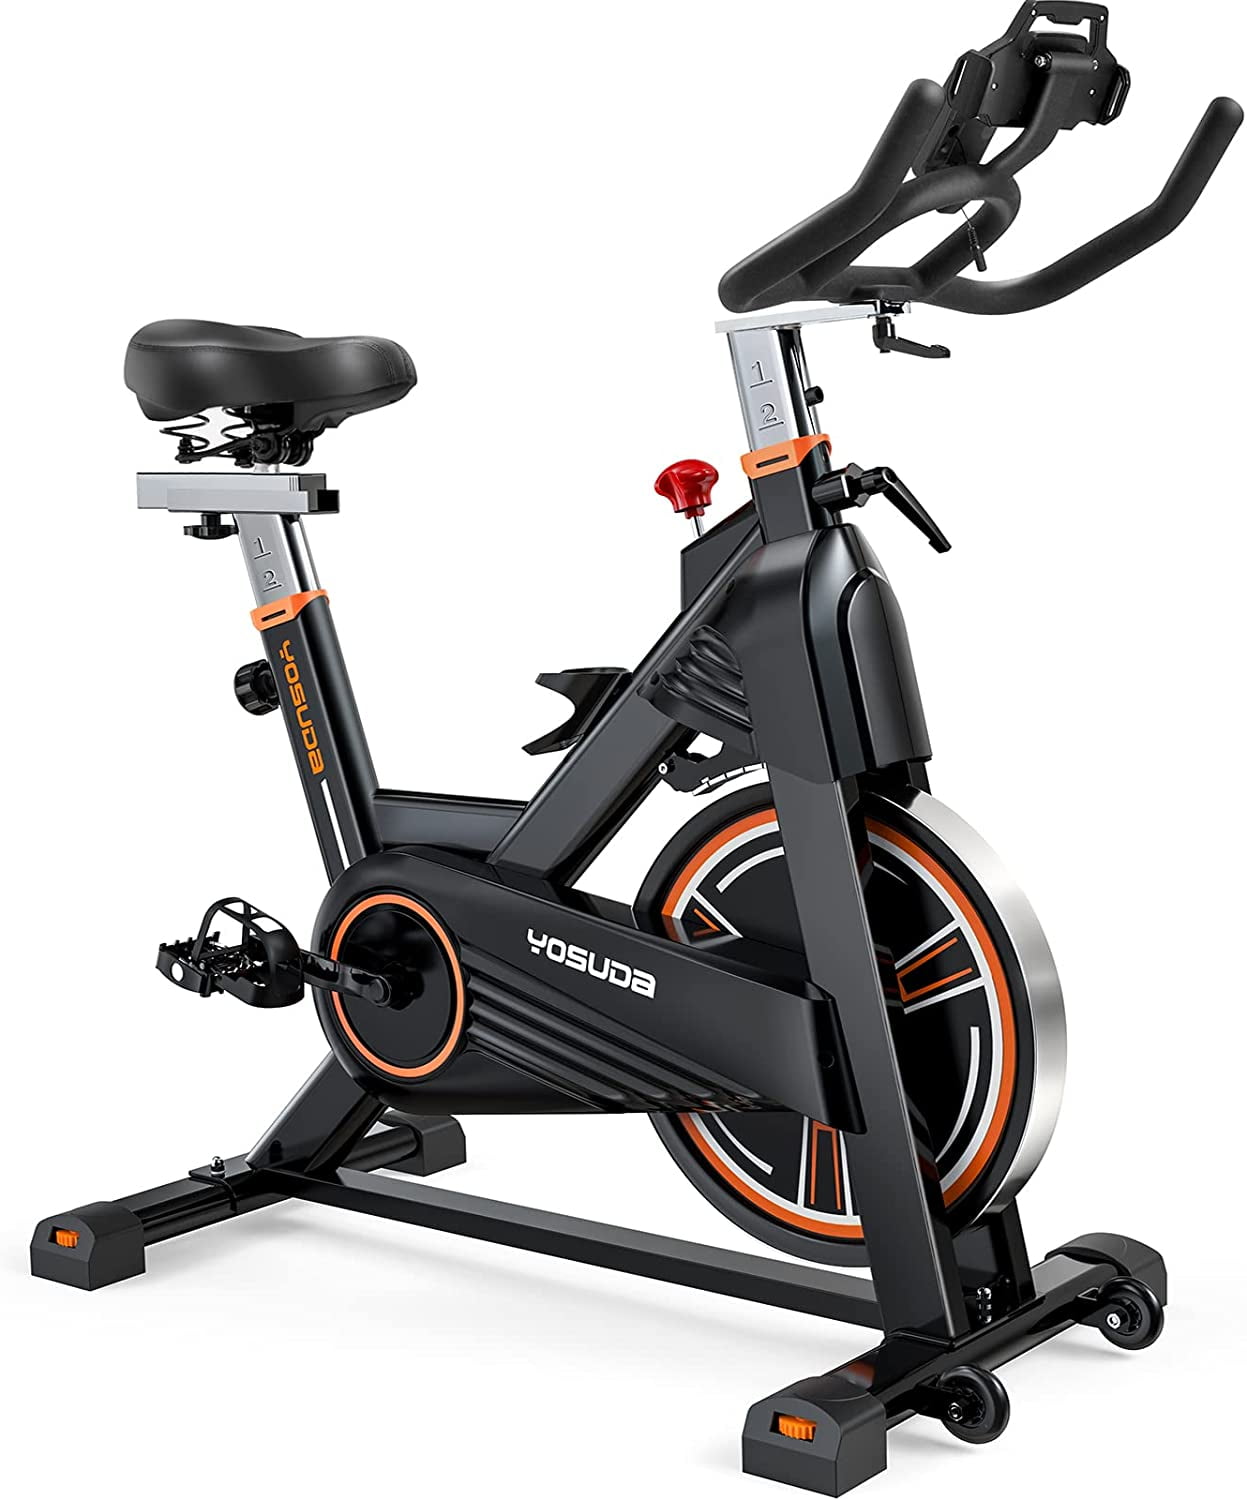 Details about   Bicycle Cycling Fitness Gym Exercise Stationary Bike Cardio Workout Home Use 